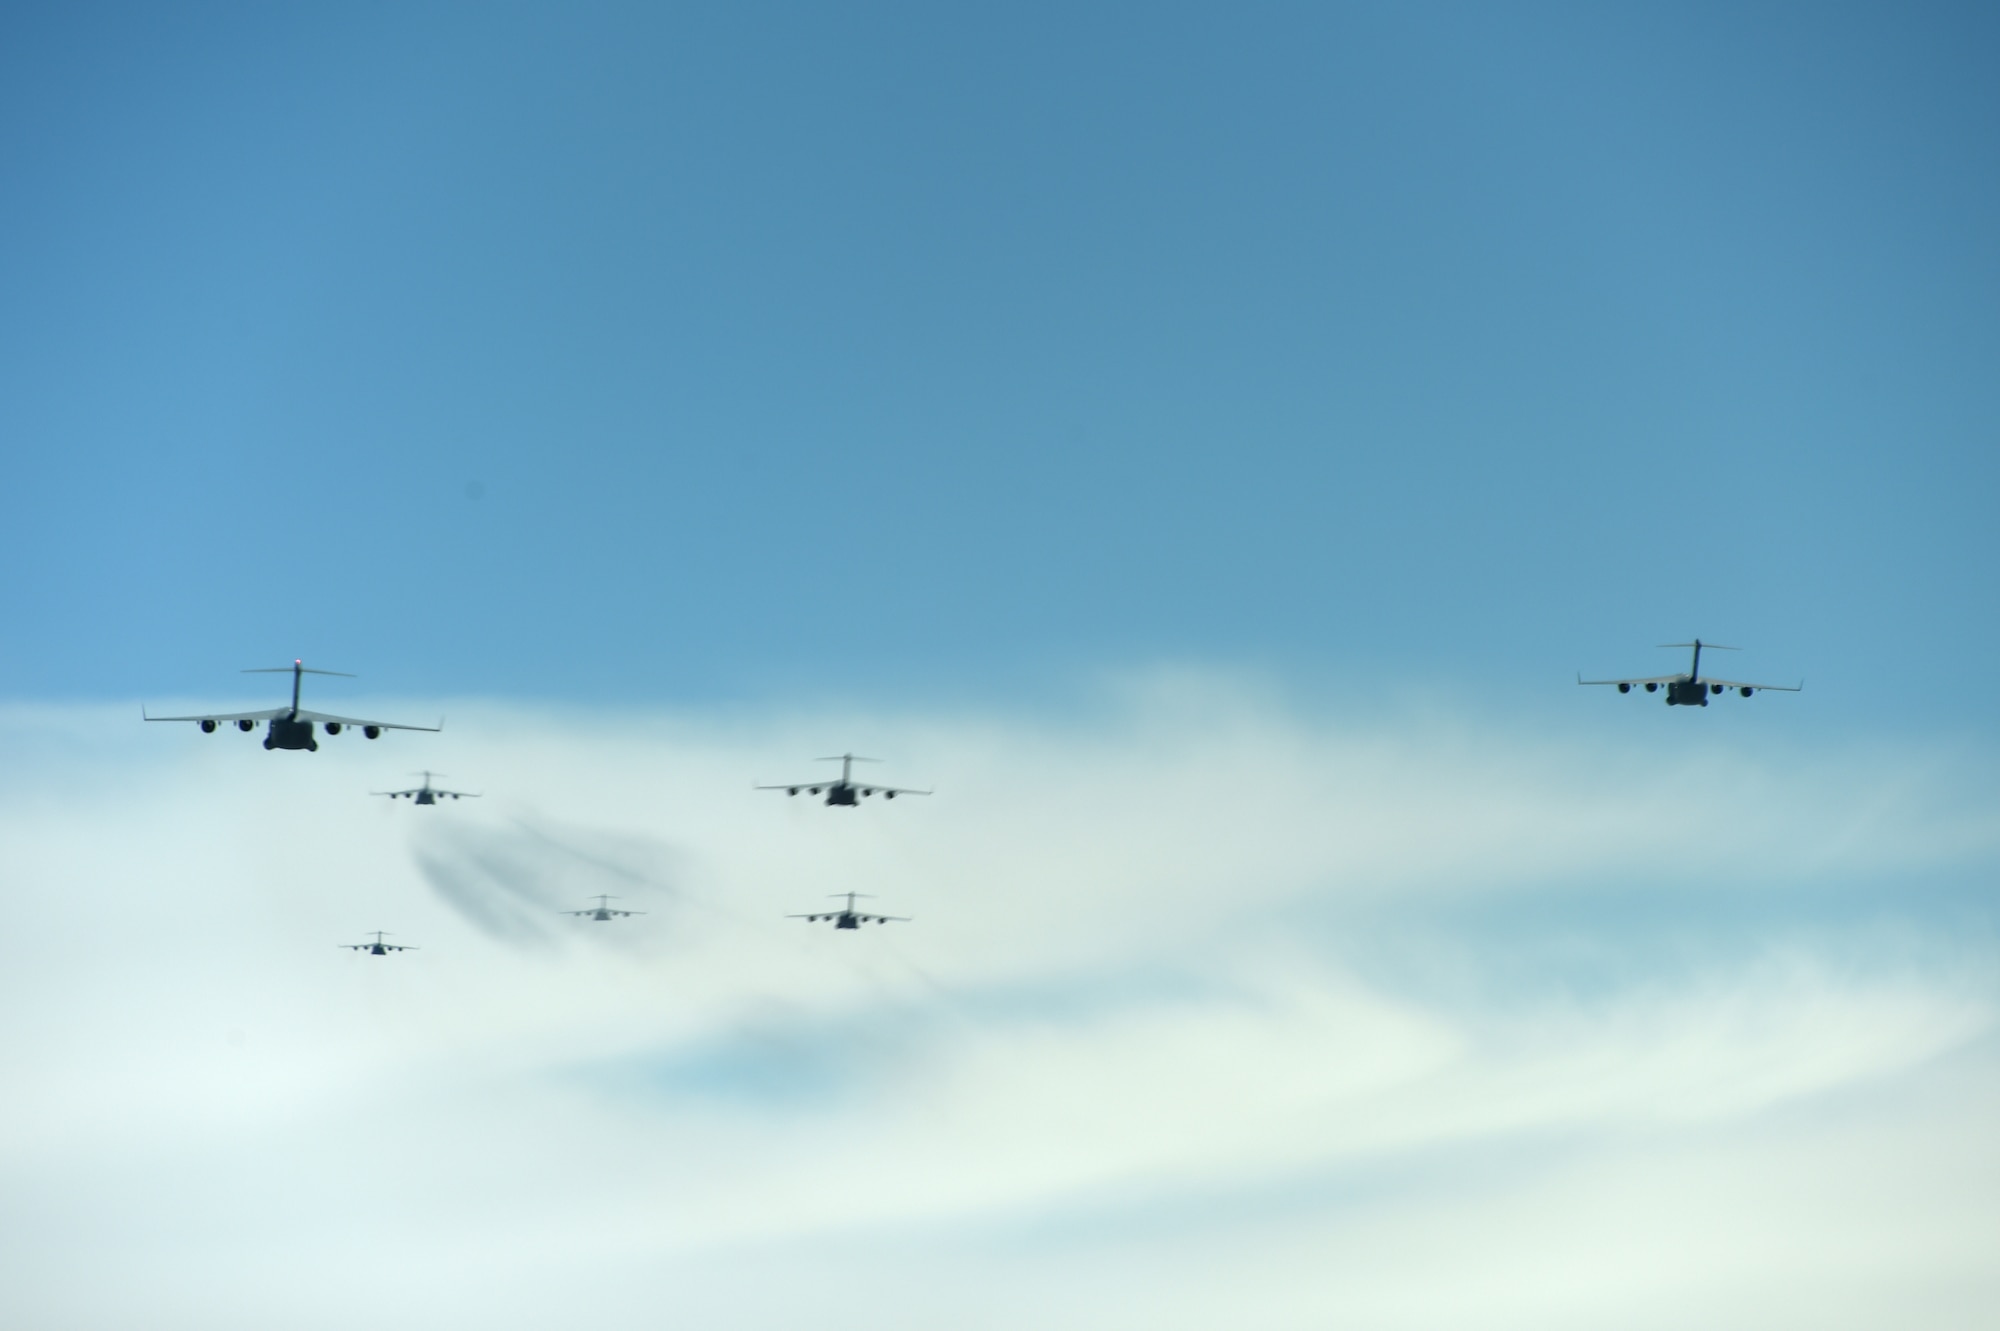 A formation of C-17 Globemaster III aircrafts from the 62nd Airlift Wing, 446th Airlift Wing, and Joint Base Elmendorf-Richardson, fly in a joint force exercise over the Nevada test and training range, June 6, 2020. The C-17’s made up a section of the 87 total aircraft that participated in this exercise which was the capstone event for a weapons instructor course class. (U.S. Air Force photo by Airman 1st Class Mikayla Heineck)